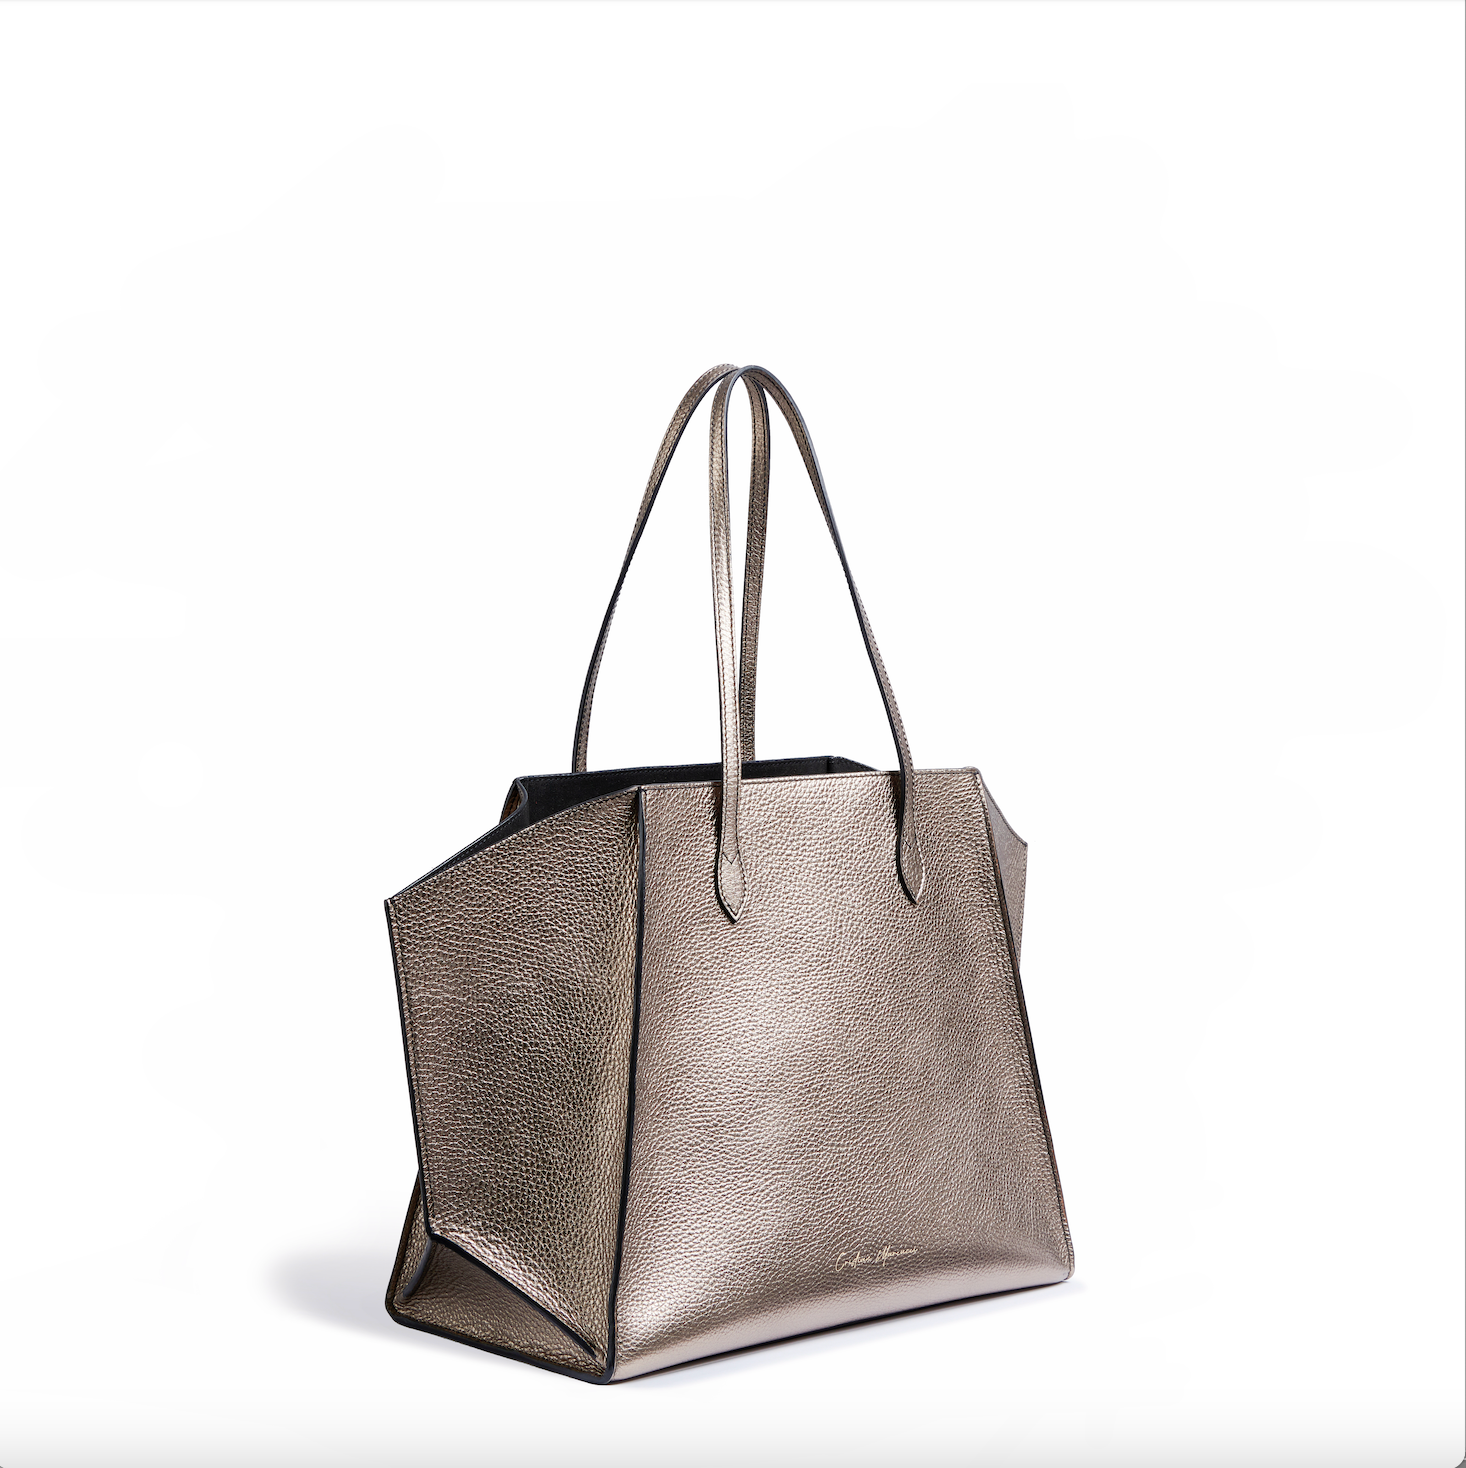 The Gemma L, from Cristian Marcucci at Mazzi d Fiori is an elegant and practical tote bag in grained metal leather. Crafted by skilled artisans, it has hand-painted profiles, an internal pouch with drawstring closure and a detachable clutch bag. Capacious but light, refined but with a decisive shape, it is suitable for any occasion.